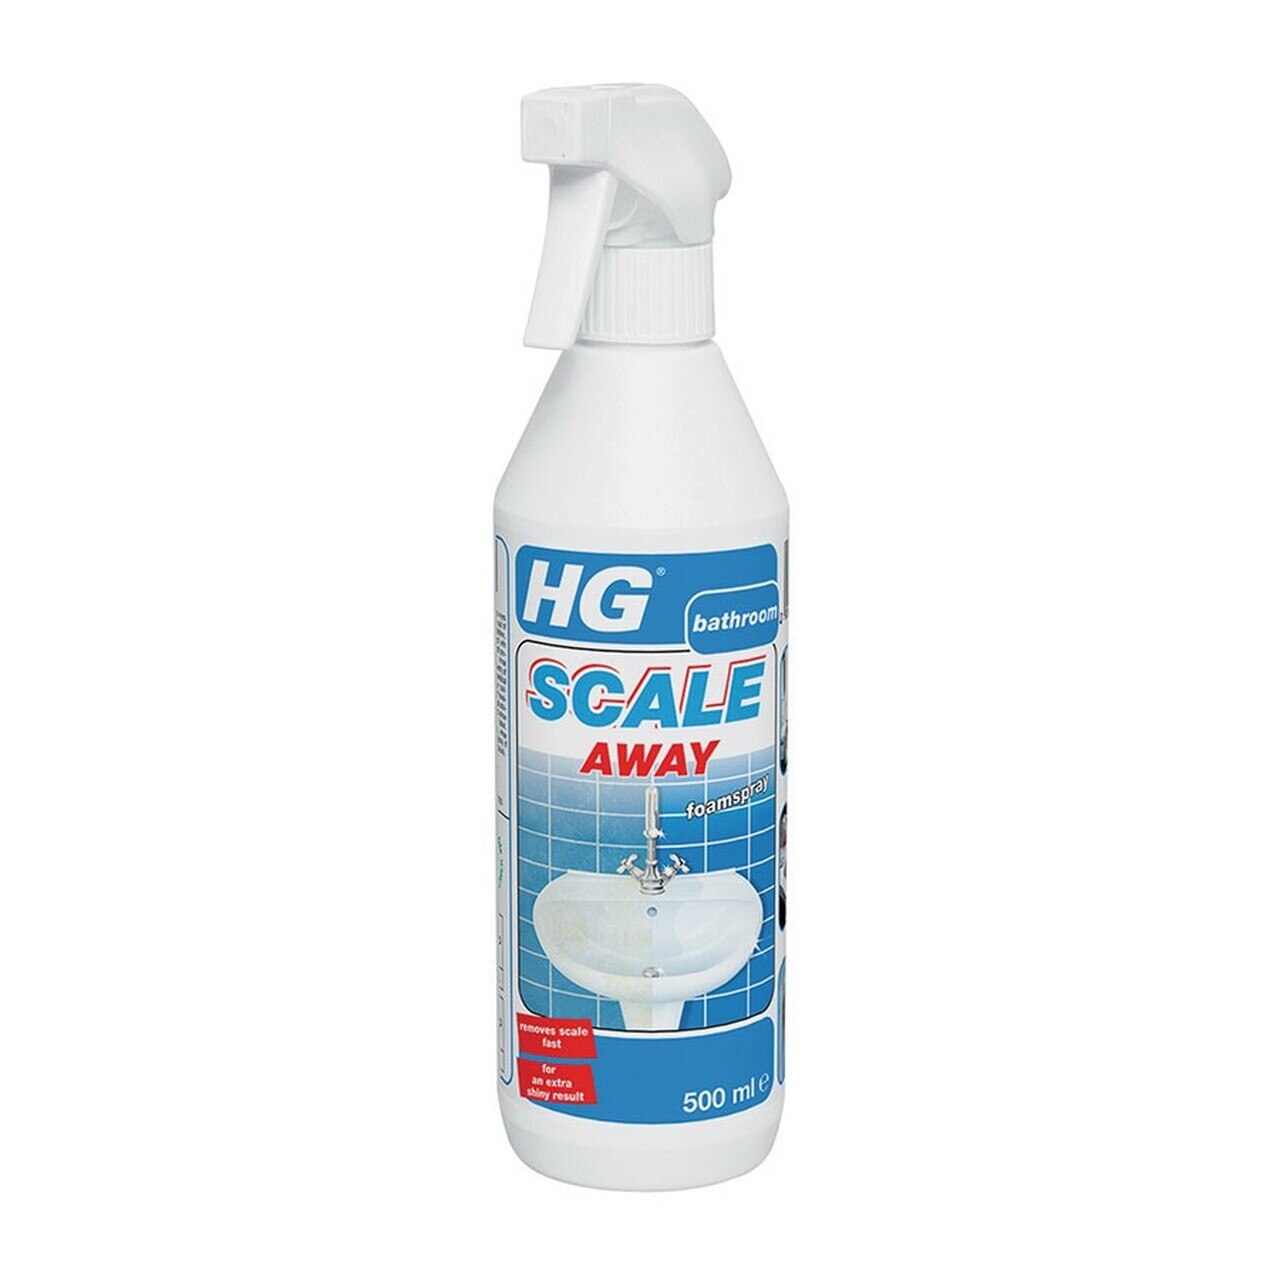 HG Scale Away Bathroom Spray 500ML (Collect Local Delivery Only)